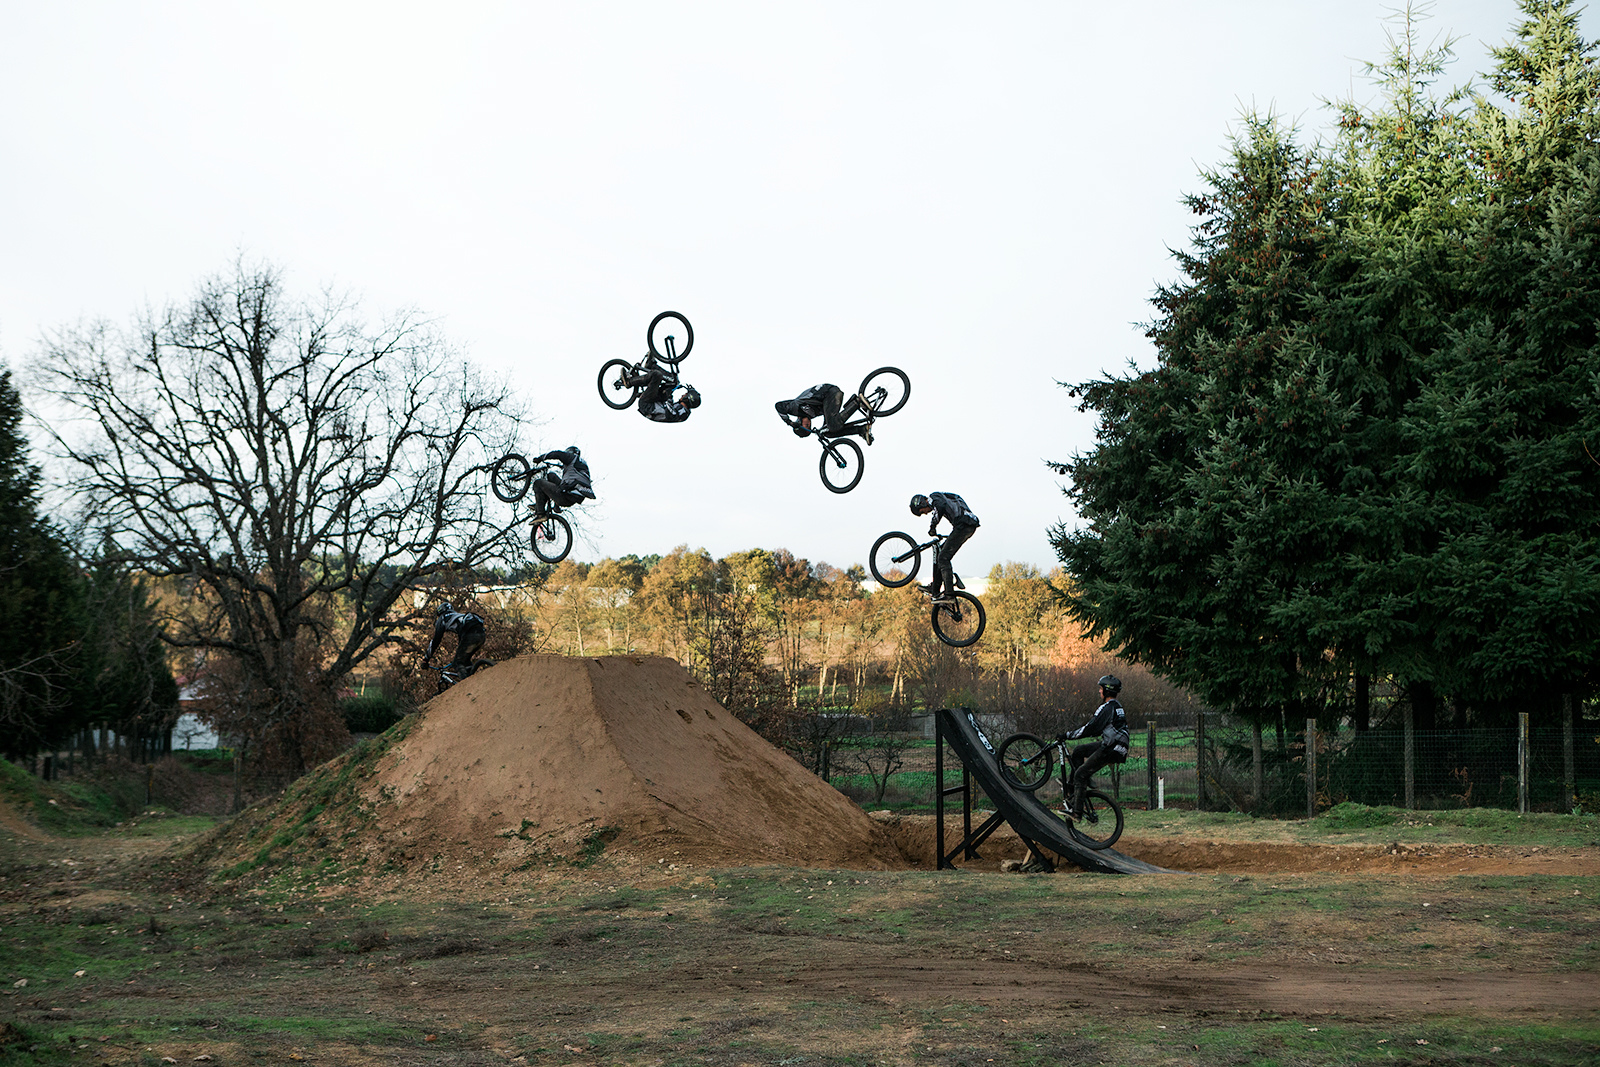 Front flip sequence